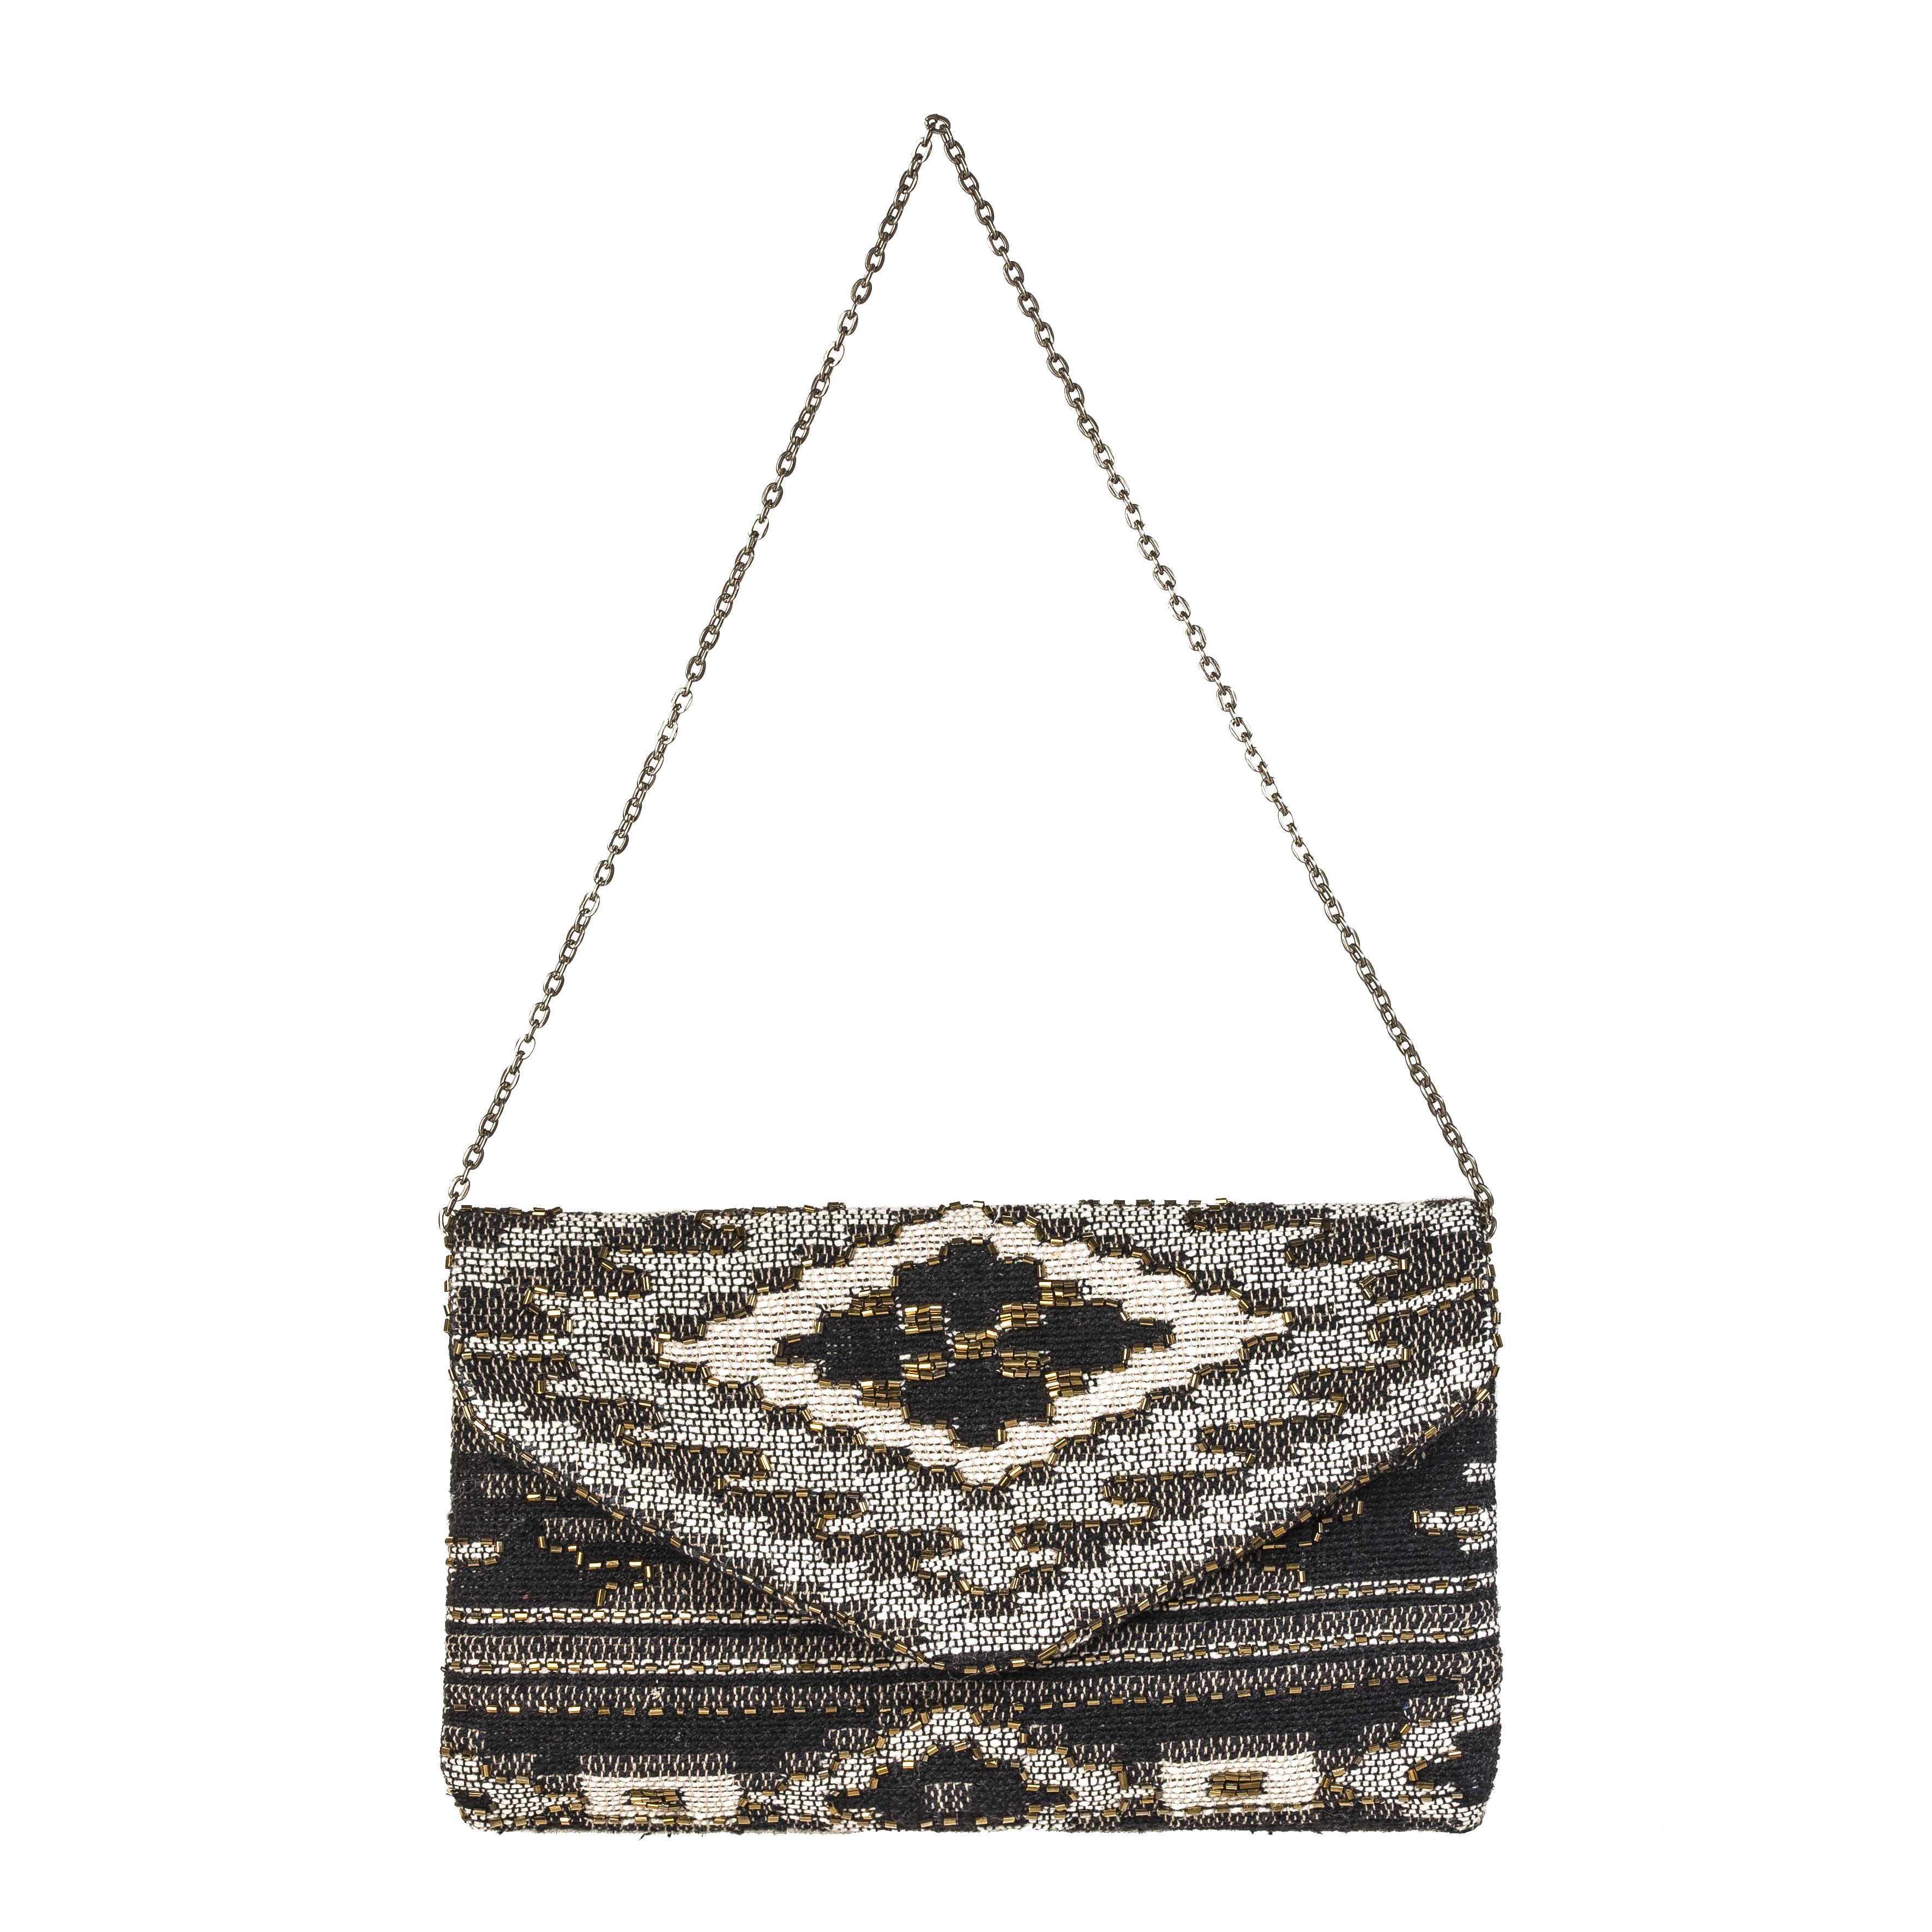 Stijlvolle clutch - s. Oliver - 49,99 euro